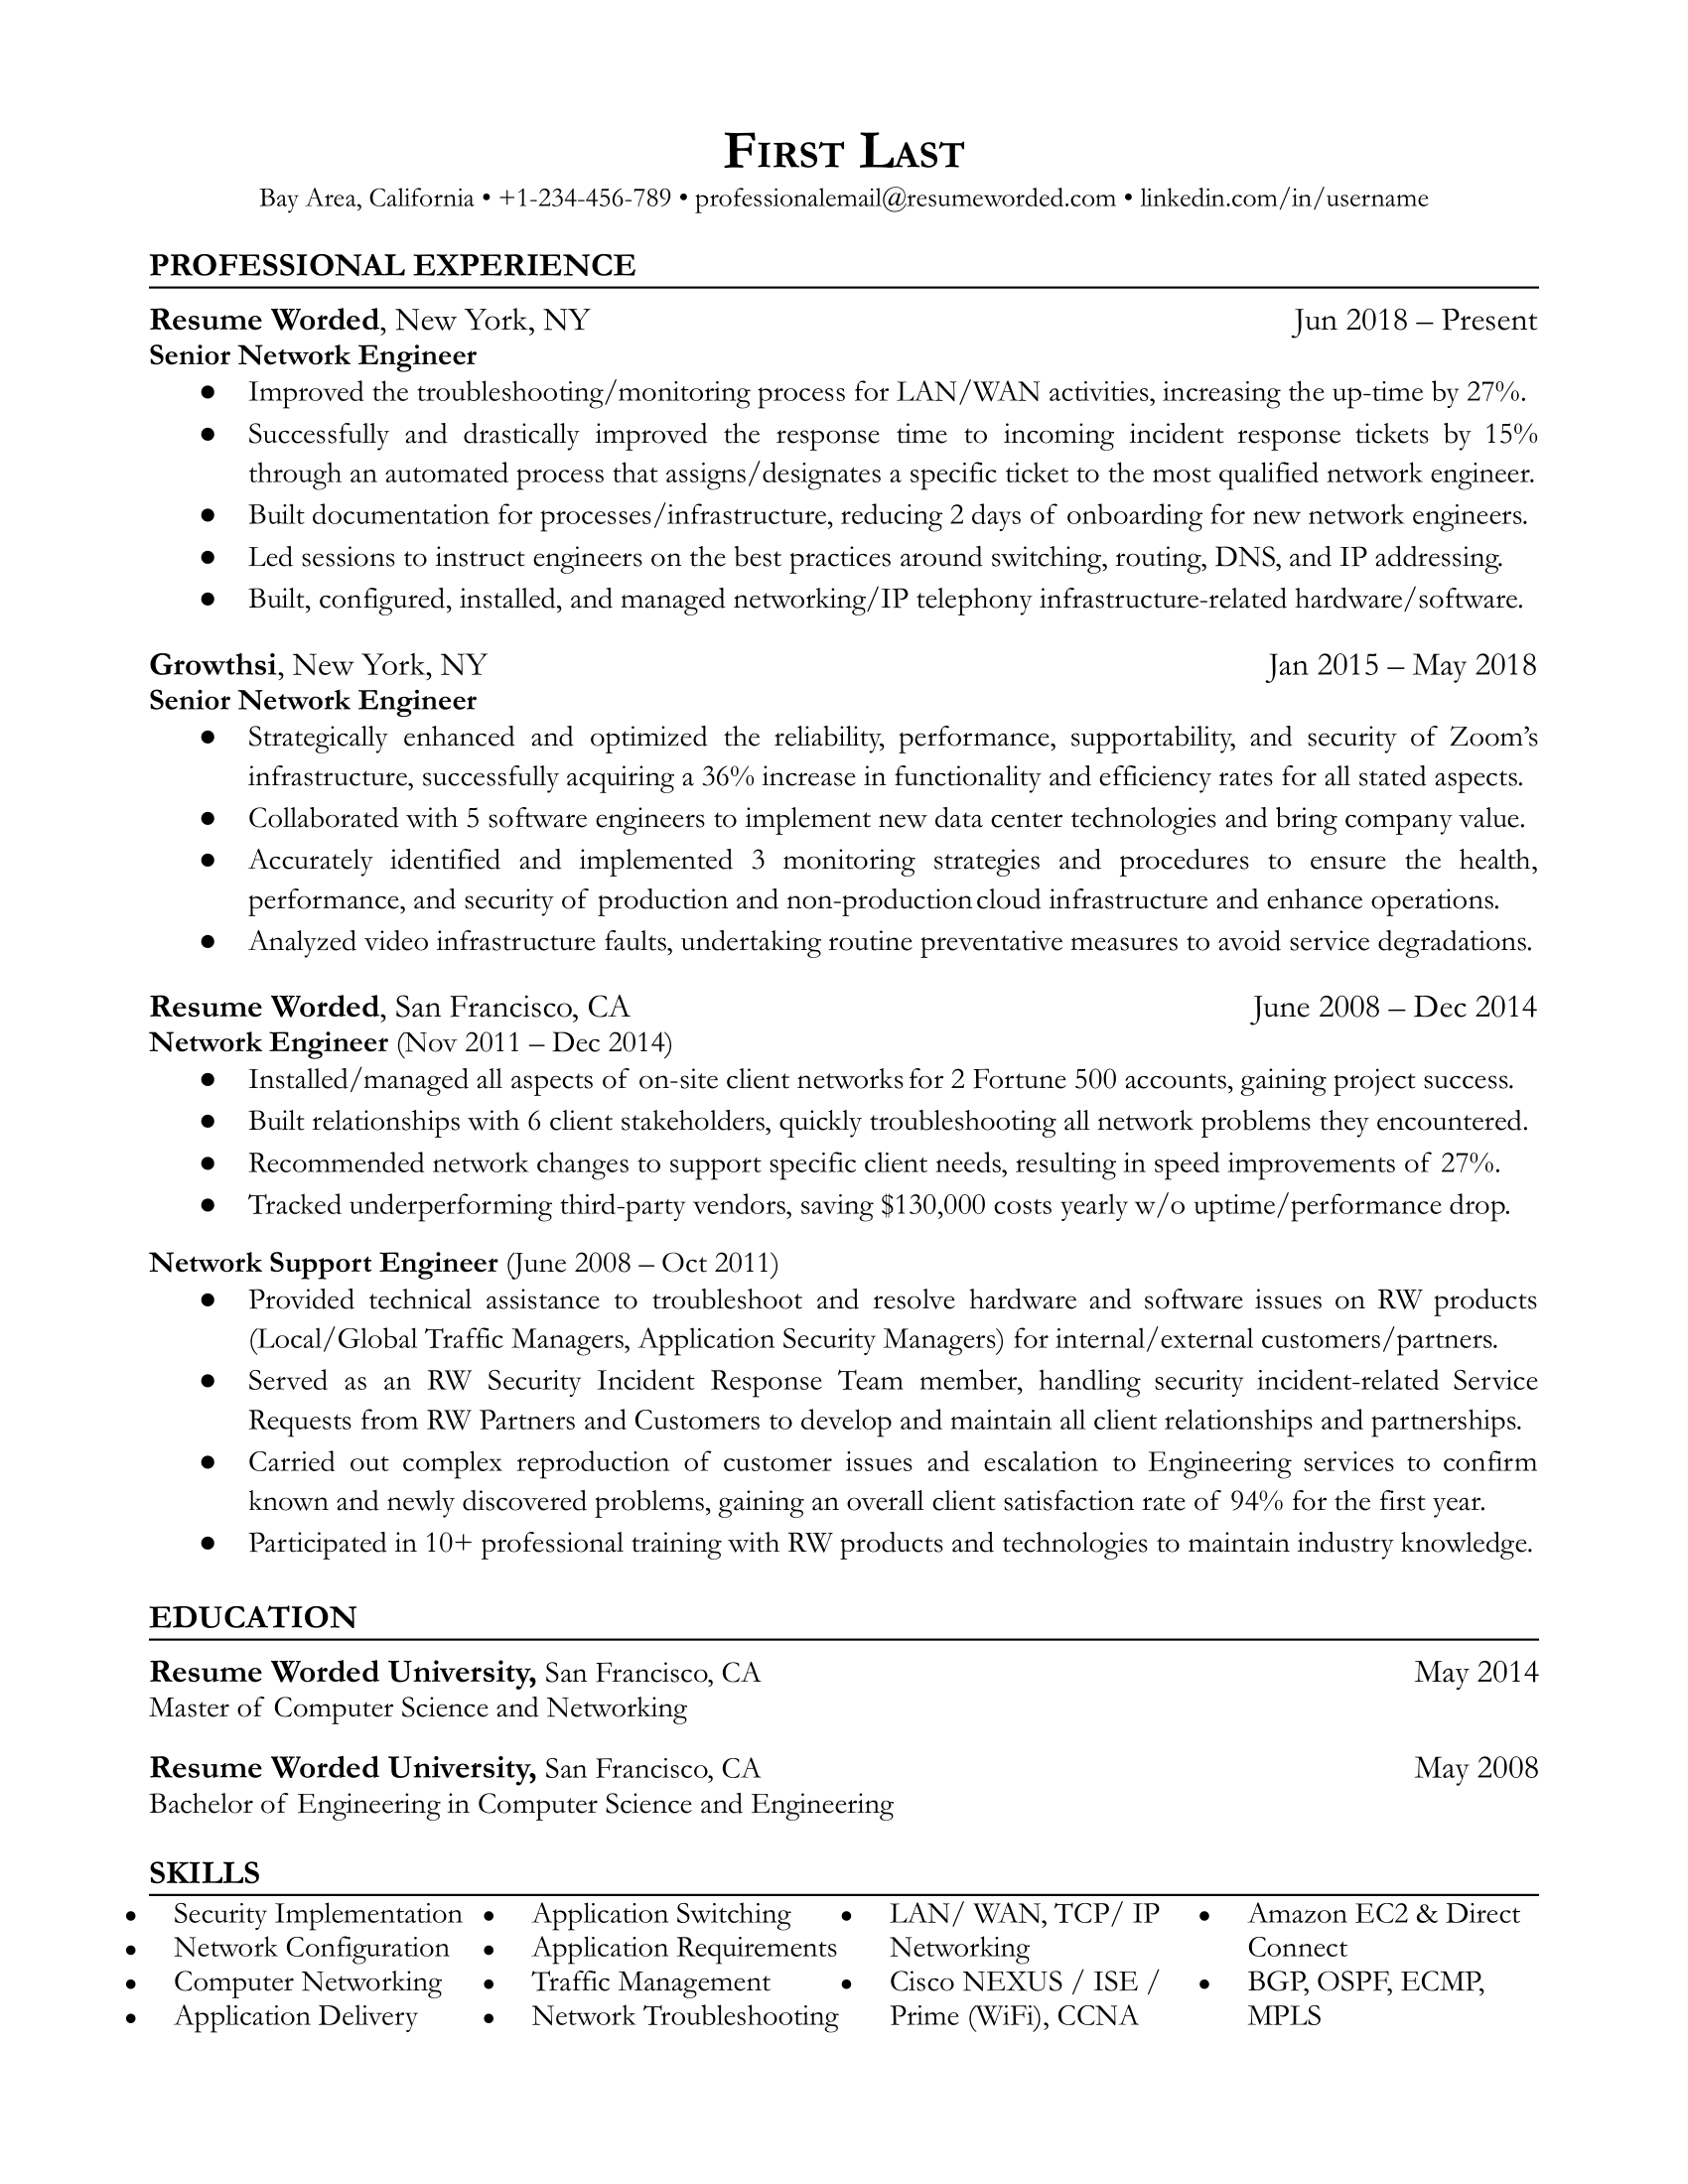 Senior network engineer resume with past promotions and effective action verbs